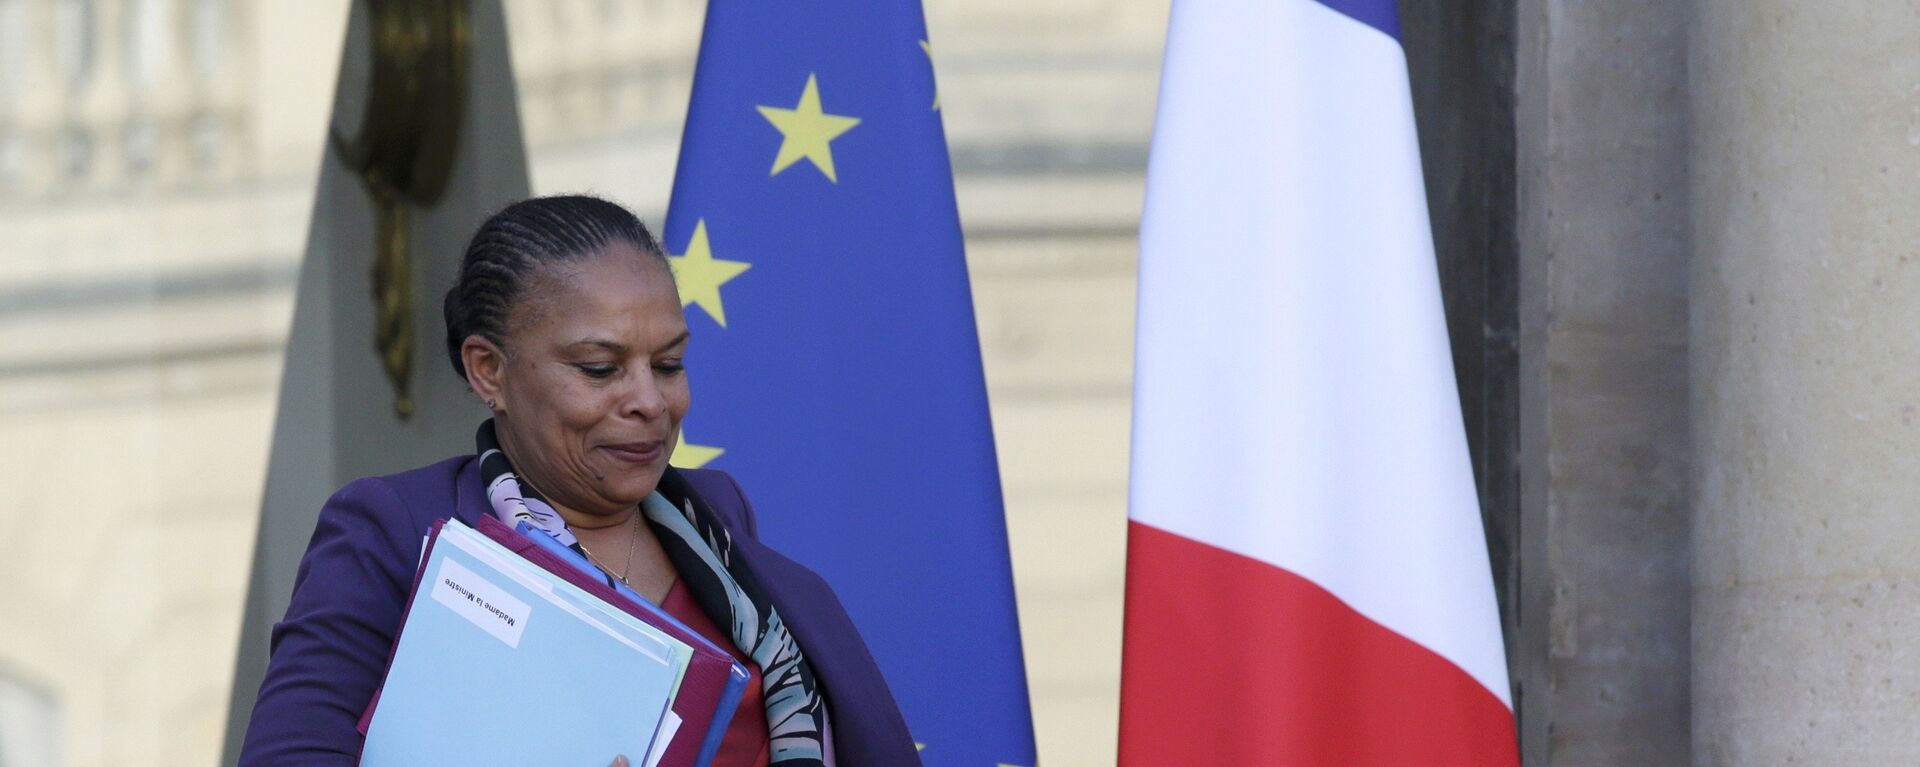 File picture shows French Justice Minister Christiane Taubira as she leaves the Elysee palace in Paris, France, December 23, 2015, following the weekly cabinet meeting. - Sputnik Afrique, 1920, 30.09.2021